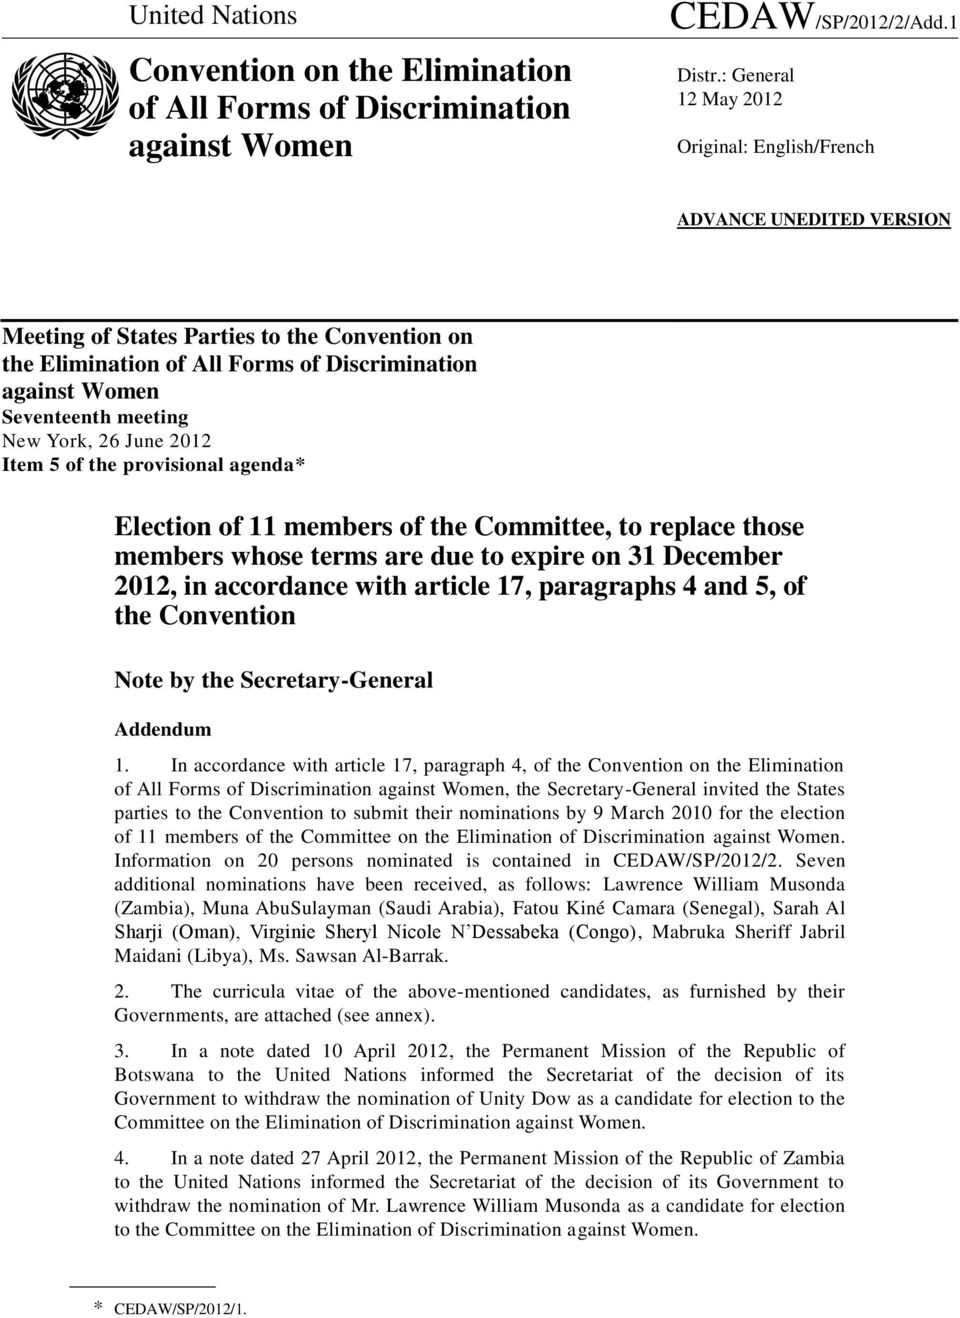 New York, 26 June 2012 Item 5 of the provisional agenda* Election of 11 members of the Committee, to replace those members whose terms are due to expire on 31 December 2012, in accordance with